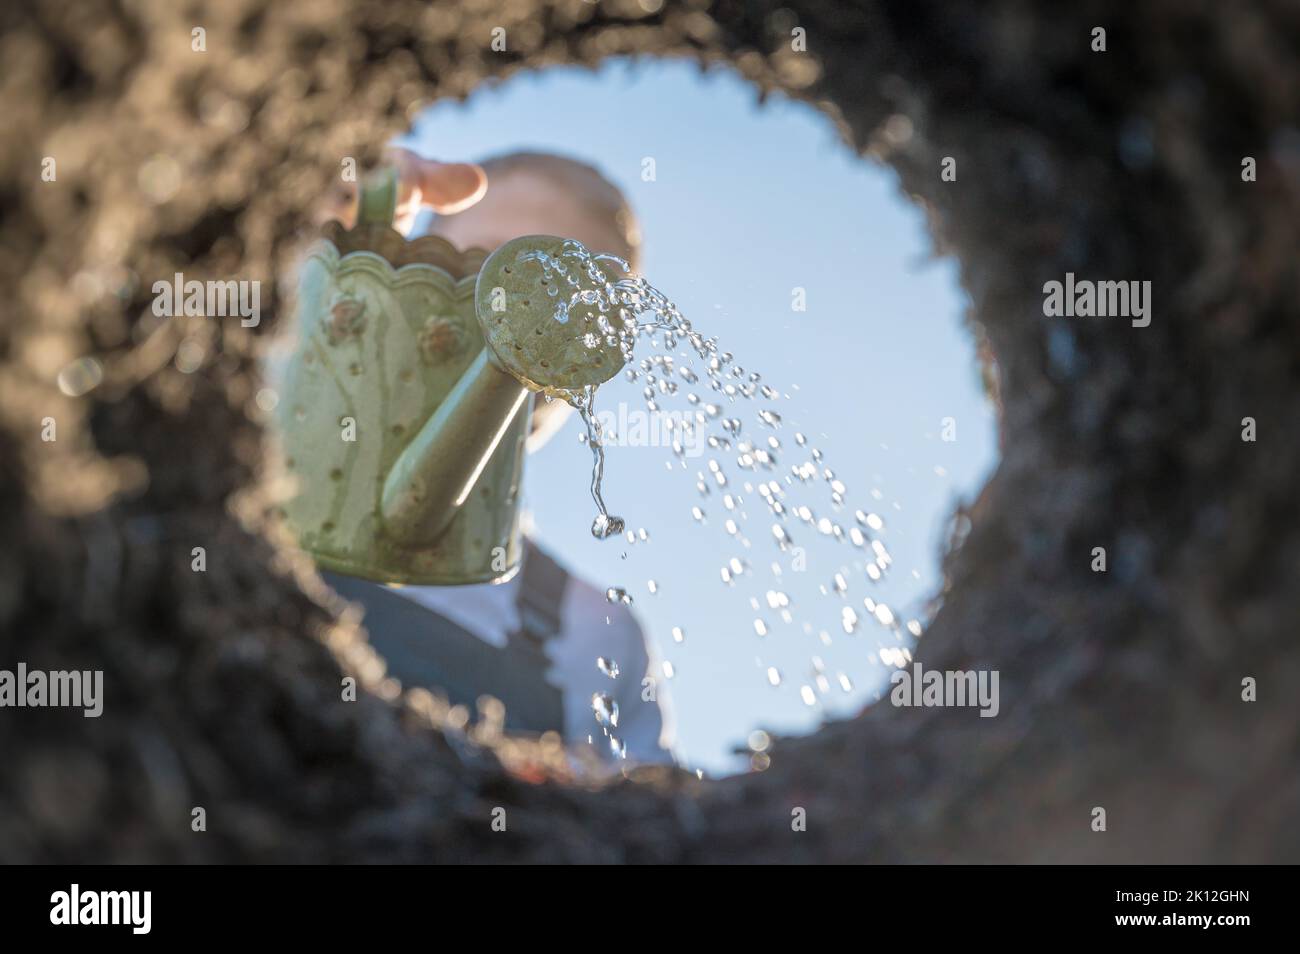 Man moistens a hole in the ground in preparation for planting young plants in spring Stock Photo